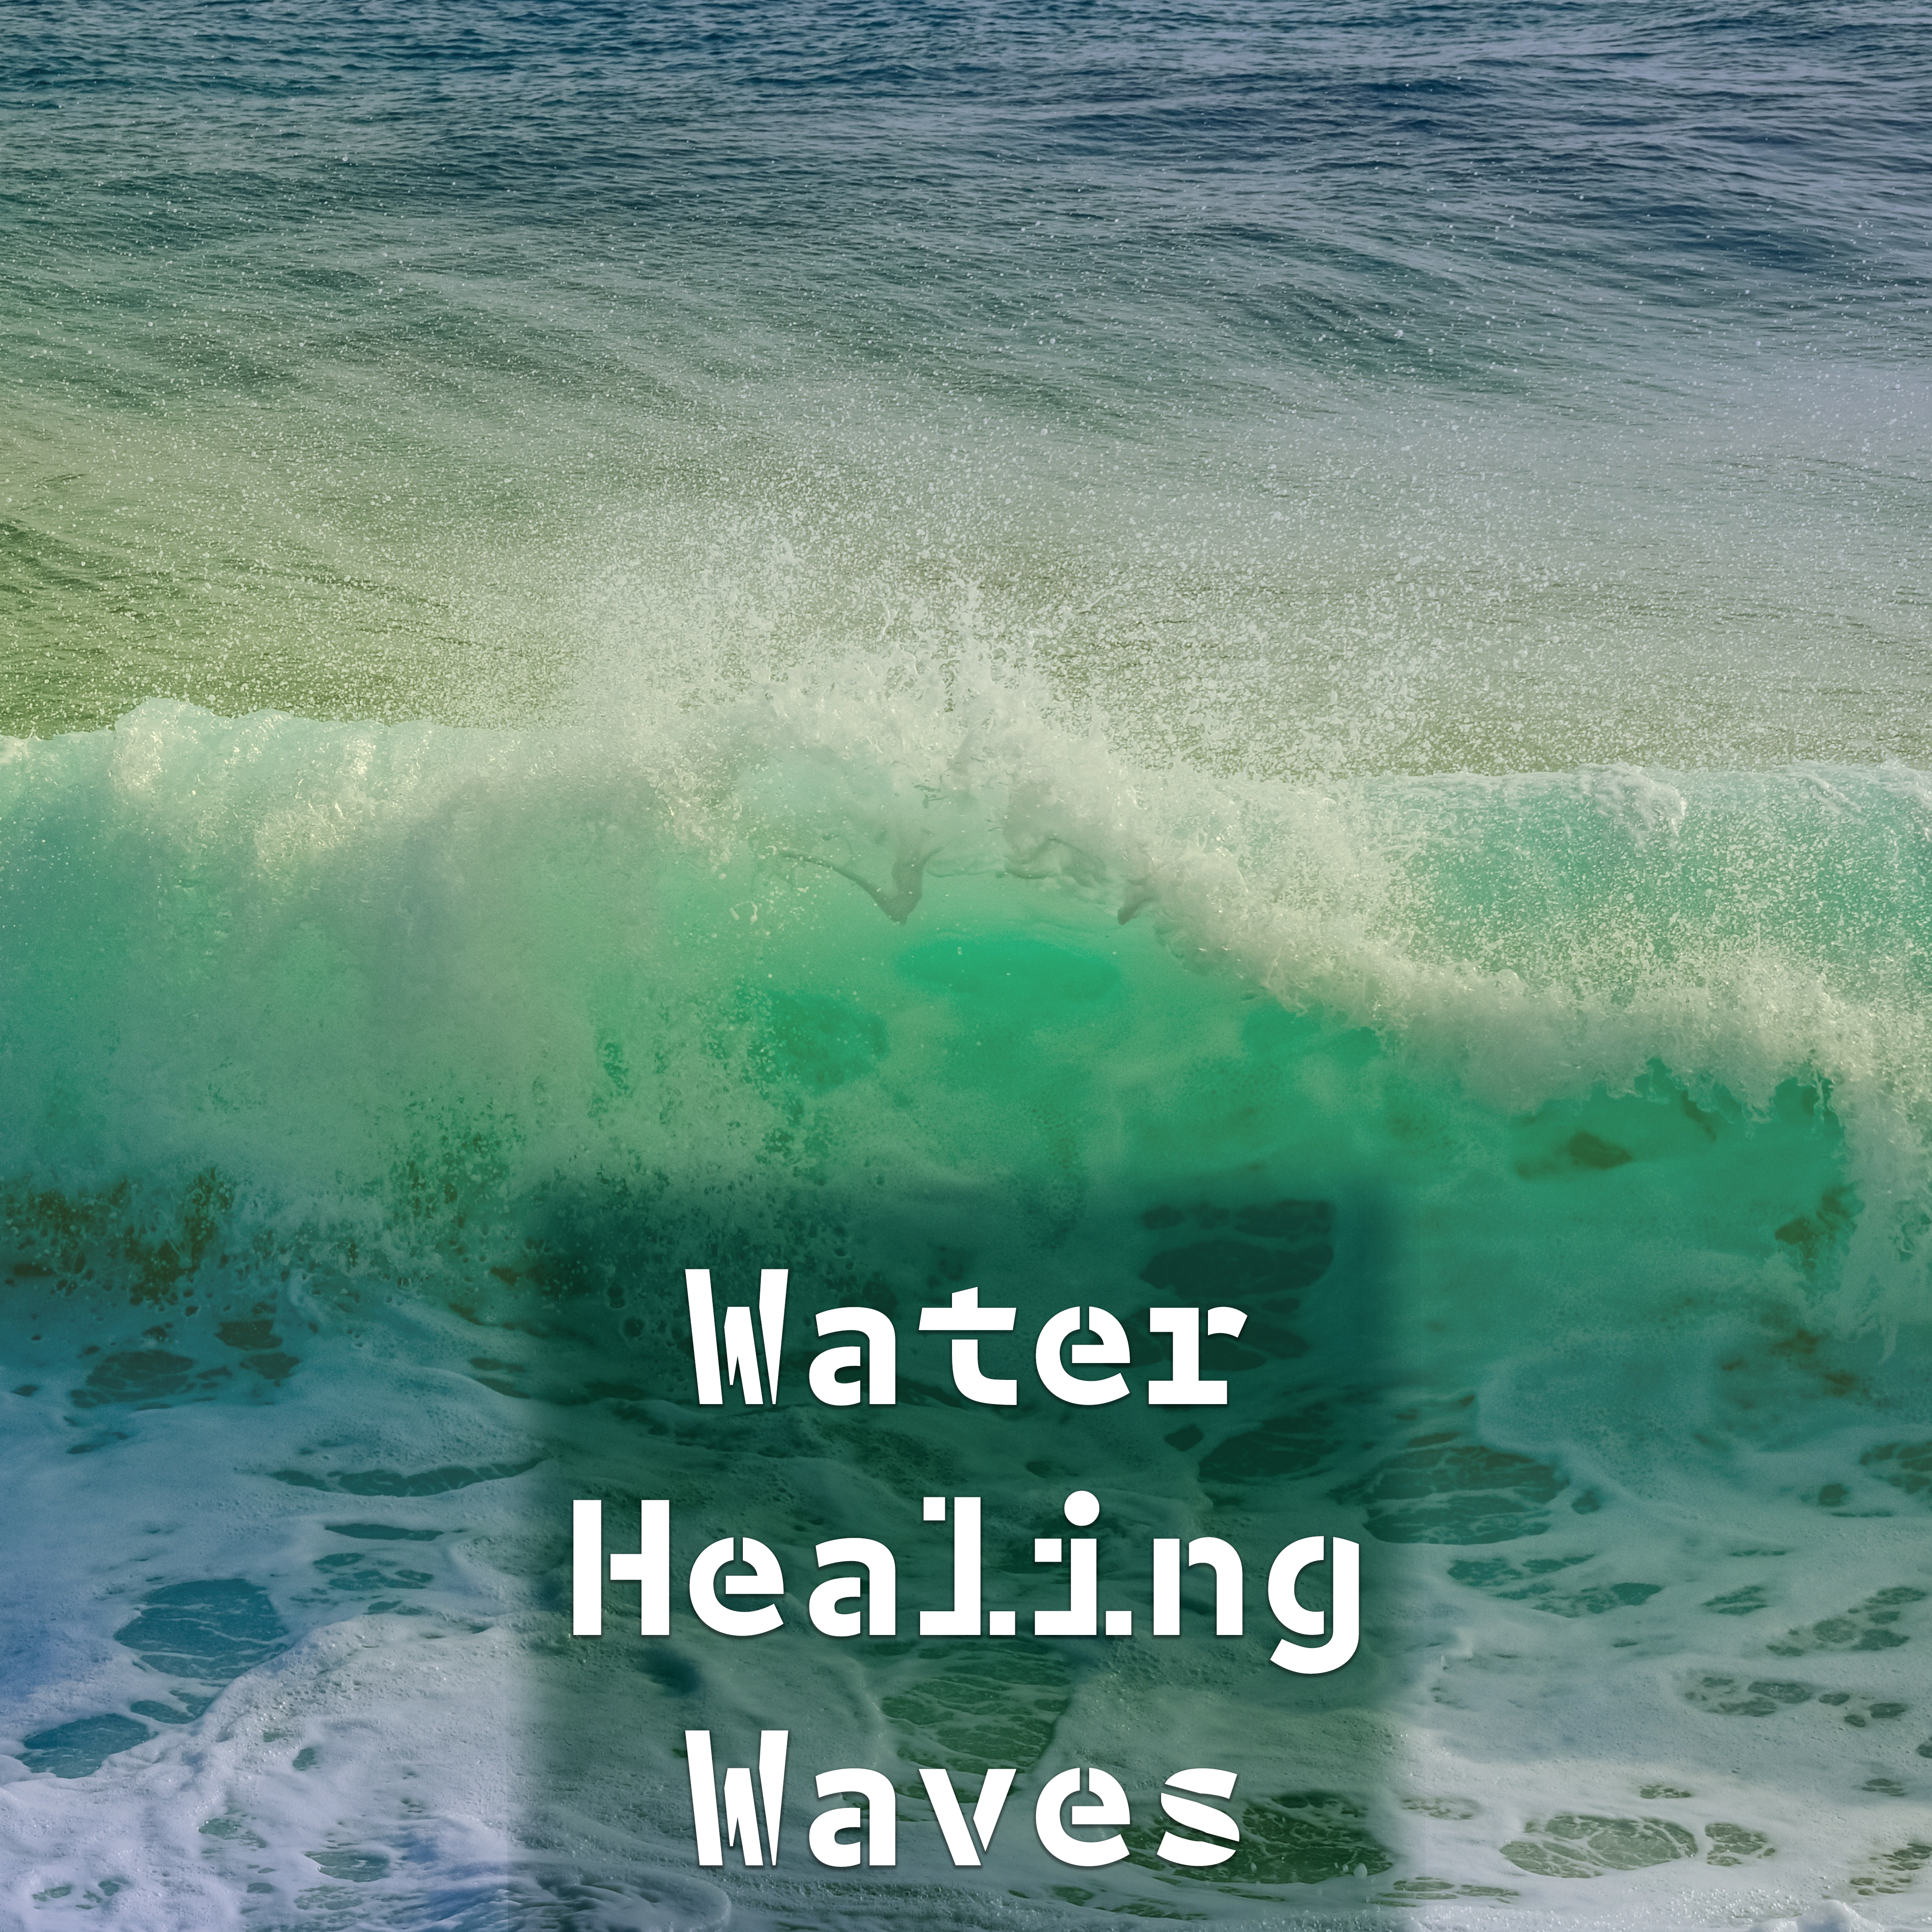 Water Healing Waves – Soft Music to Relax, Nature Sounds to Heal Soul, Mind Calmness